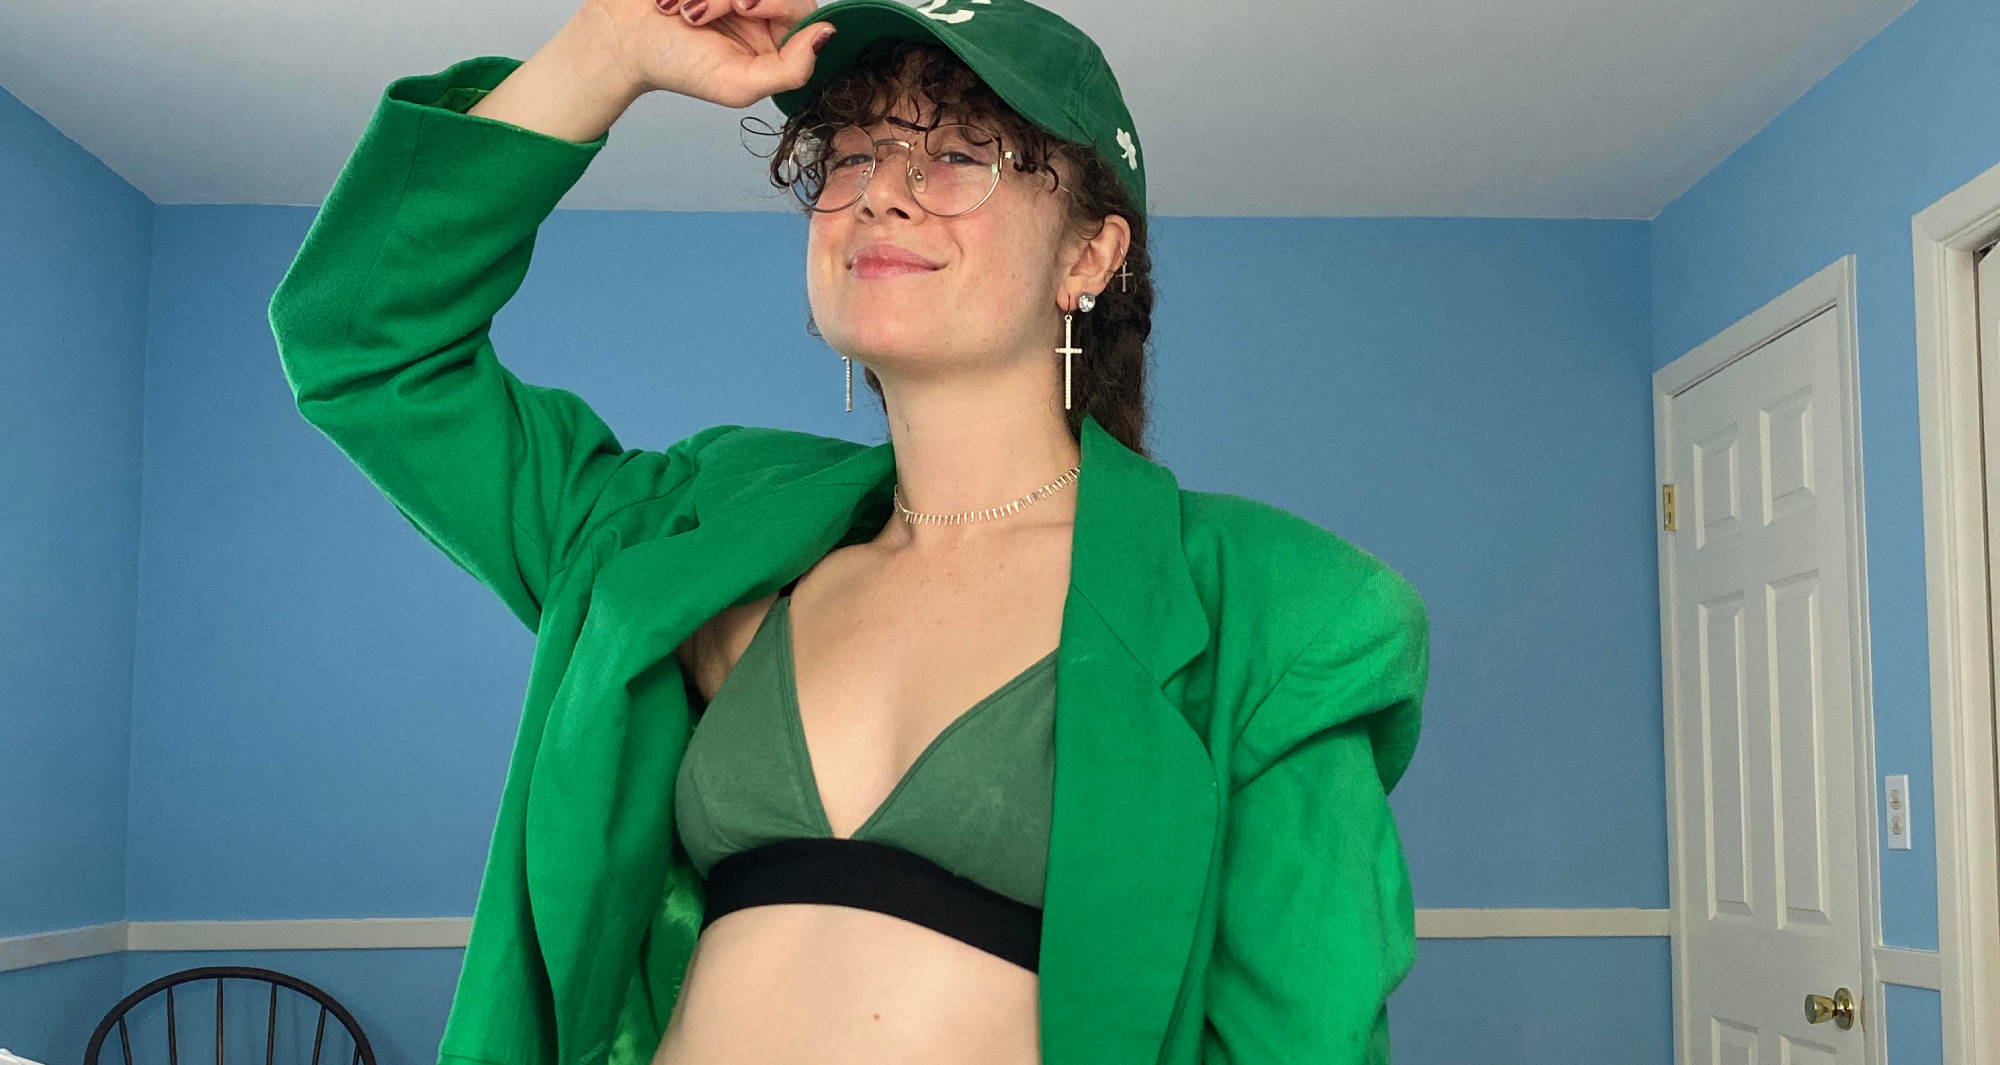 woman in a green blazer, green bralette, and green baseball hat smiles and holds her baseball hat